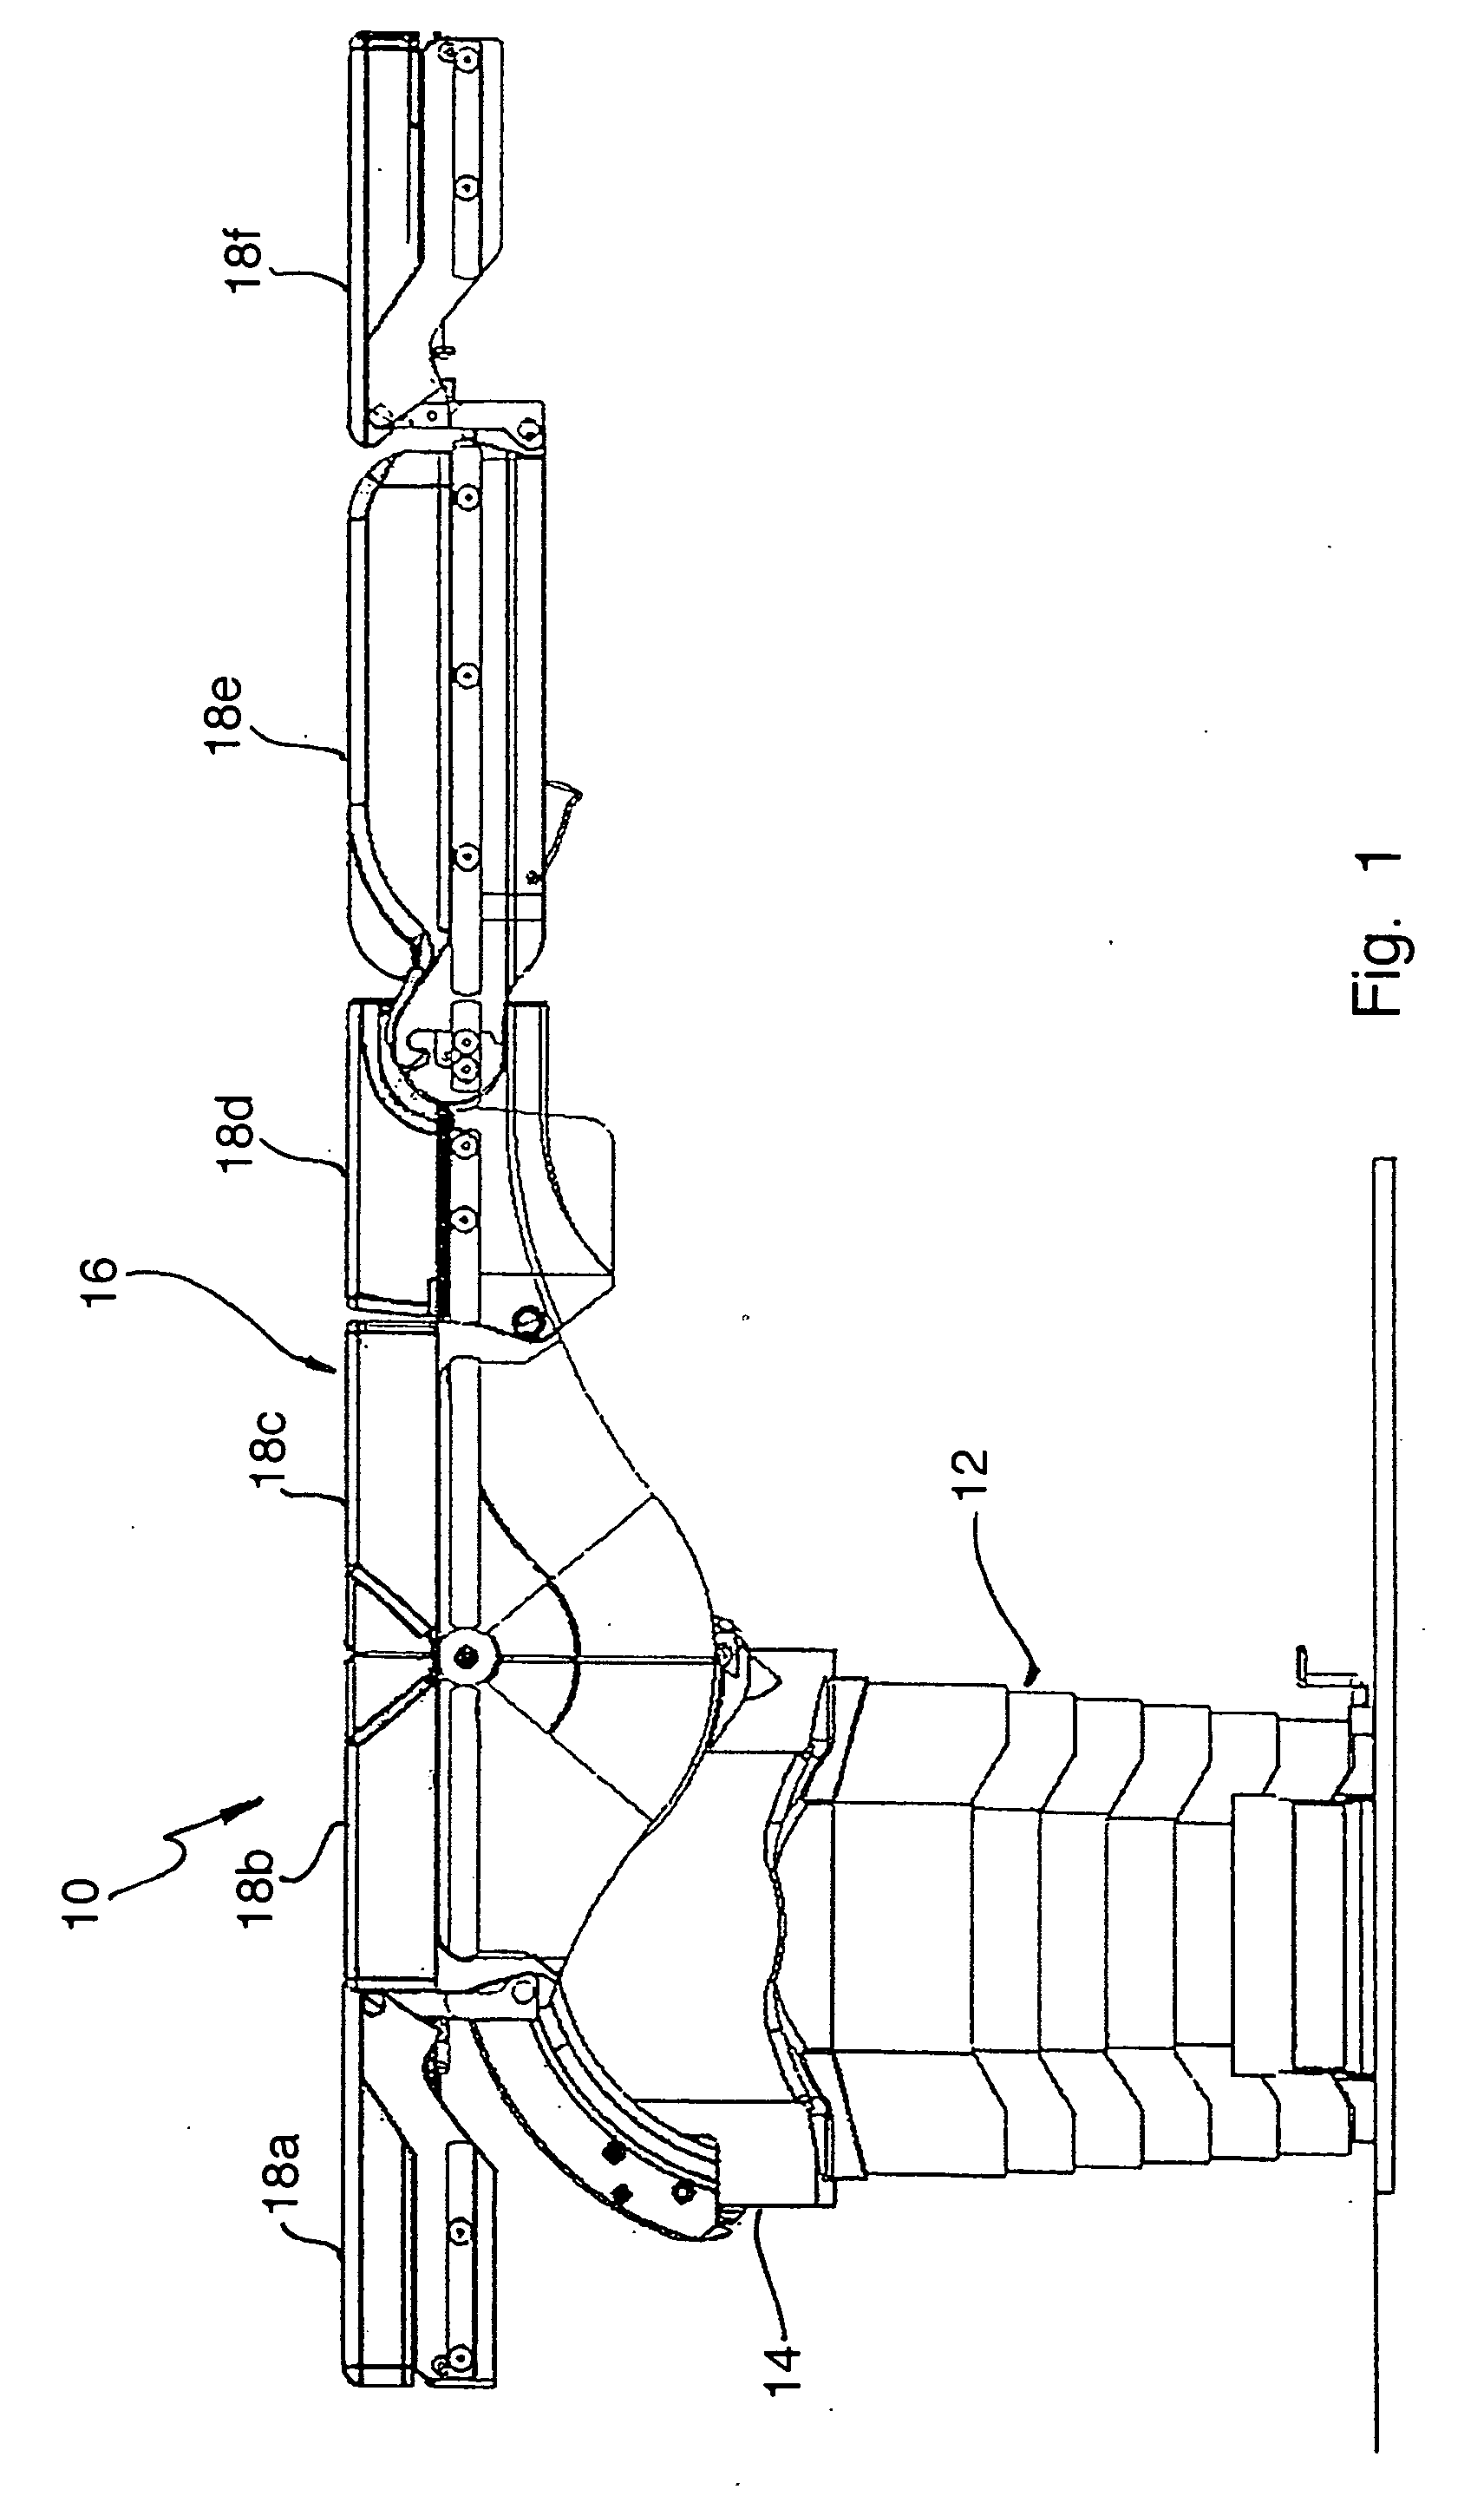 Device for adjusting an operating table